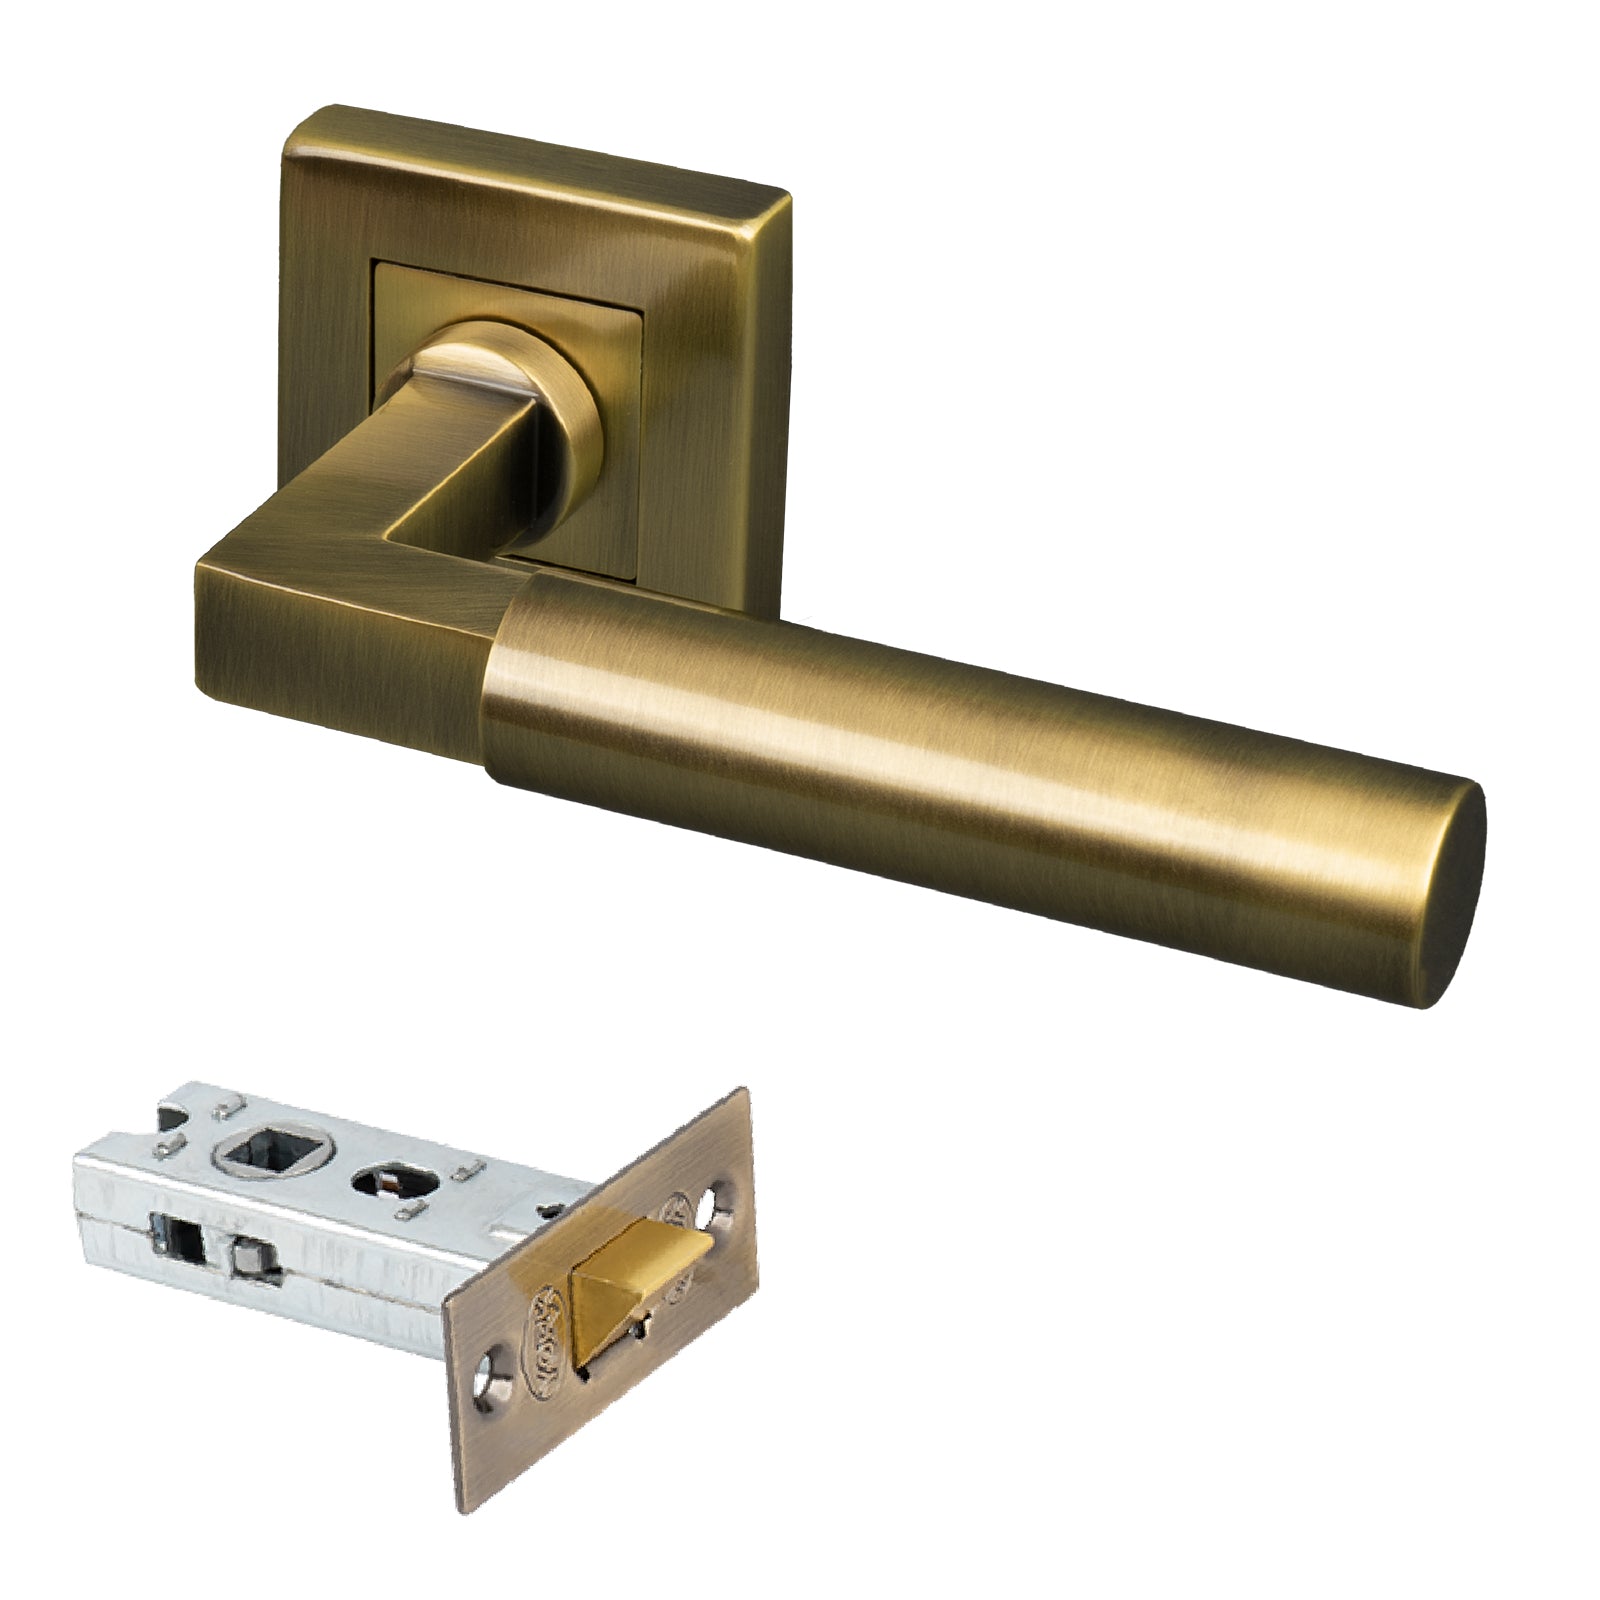 Aged Brass square rose door handles latch set, 2.5 inch latch and handles